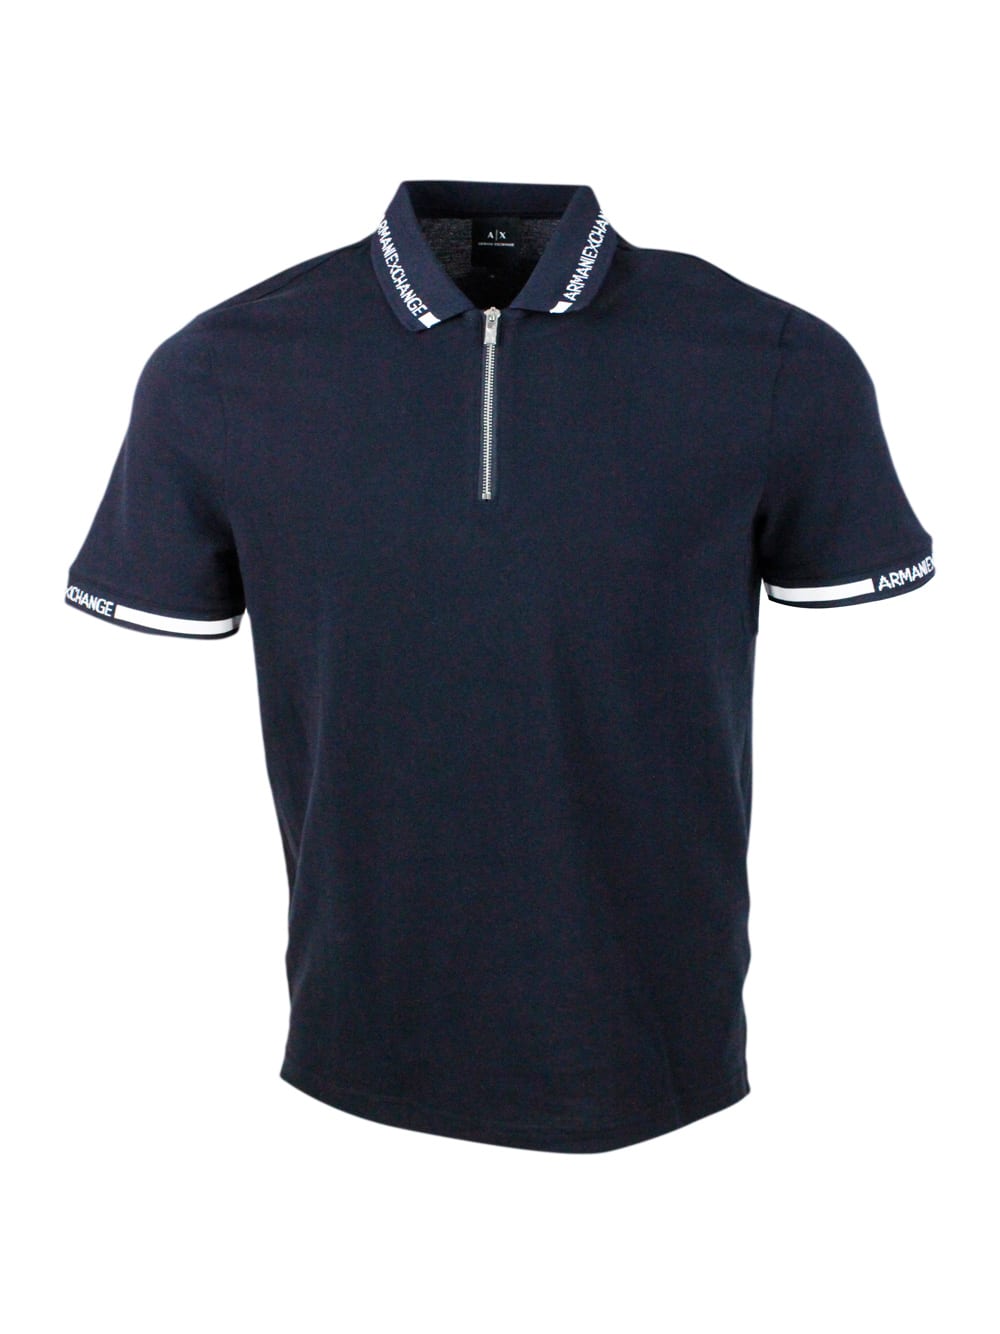 Hort-sleeved Pique Cotton Polo Shirt With Zip Closure And Writing On The Collar